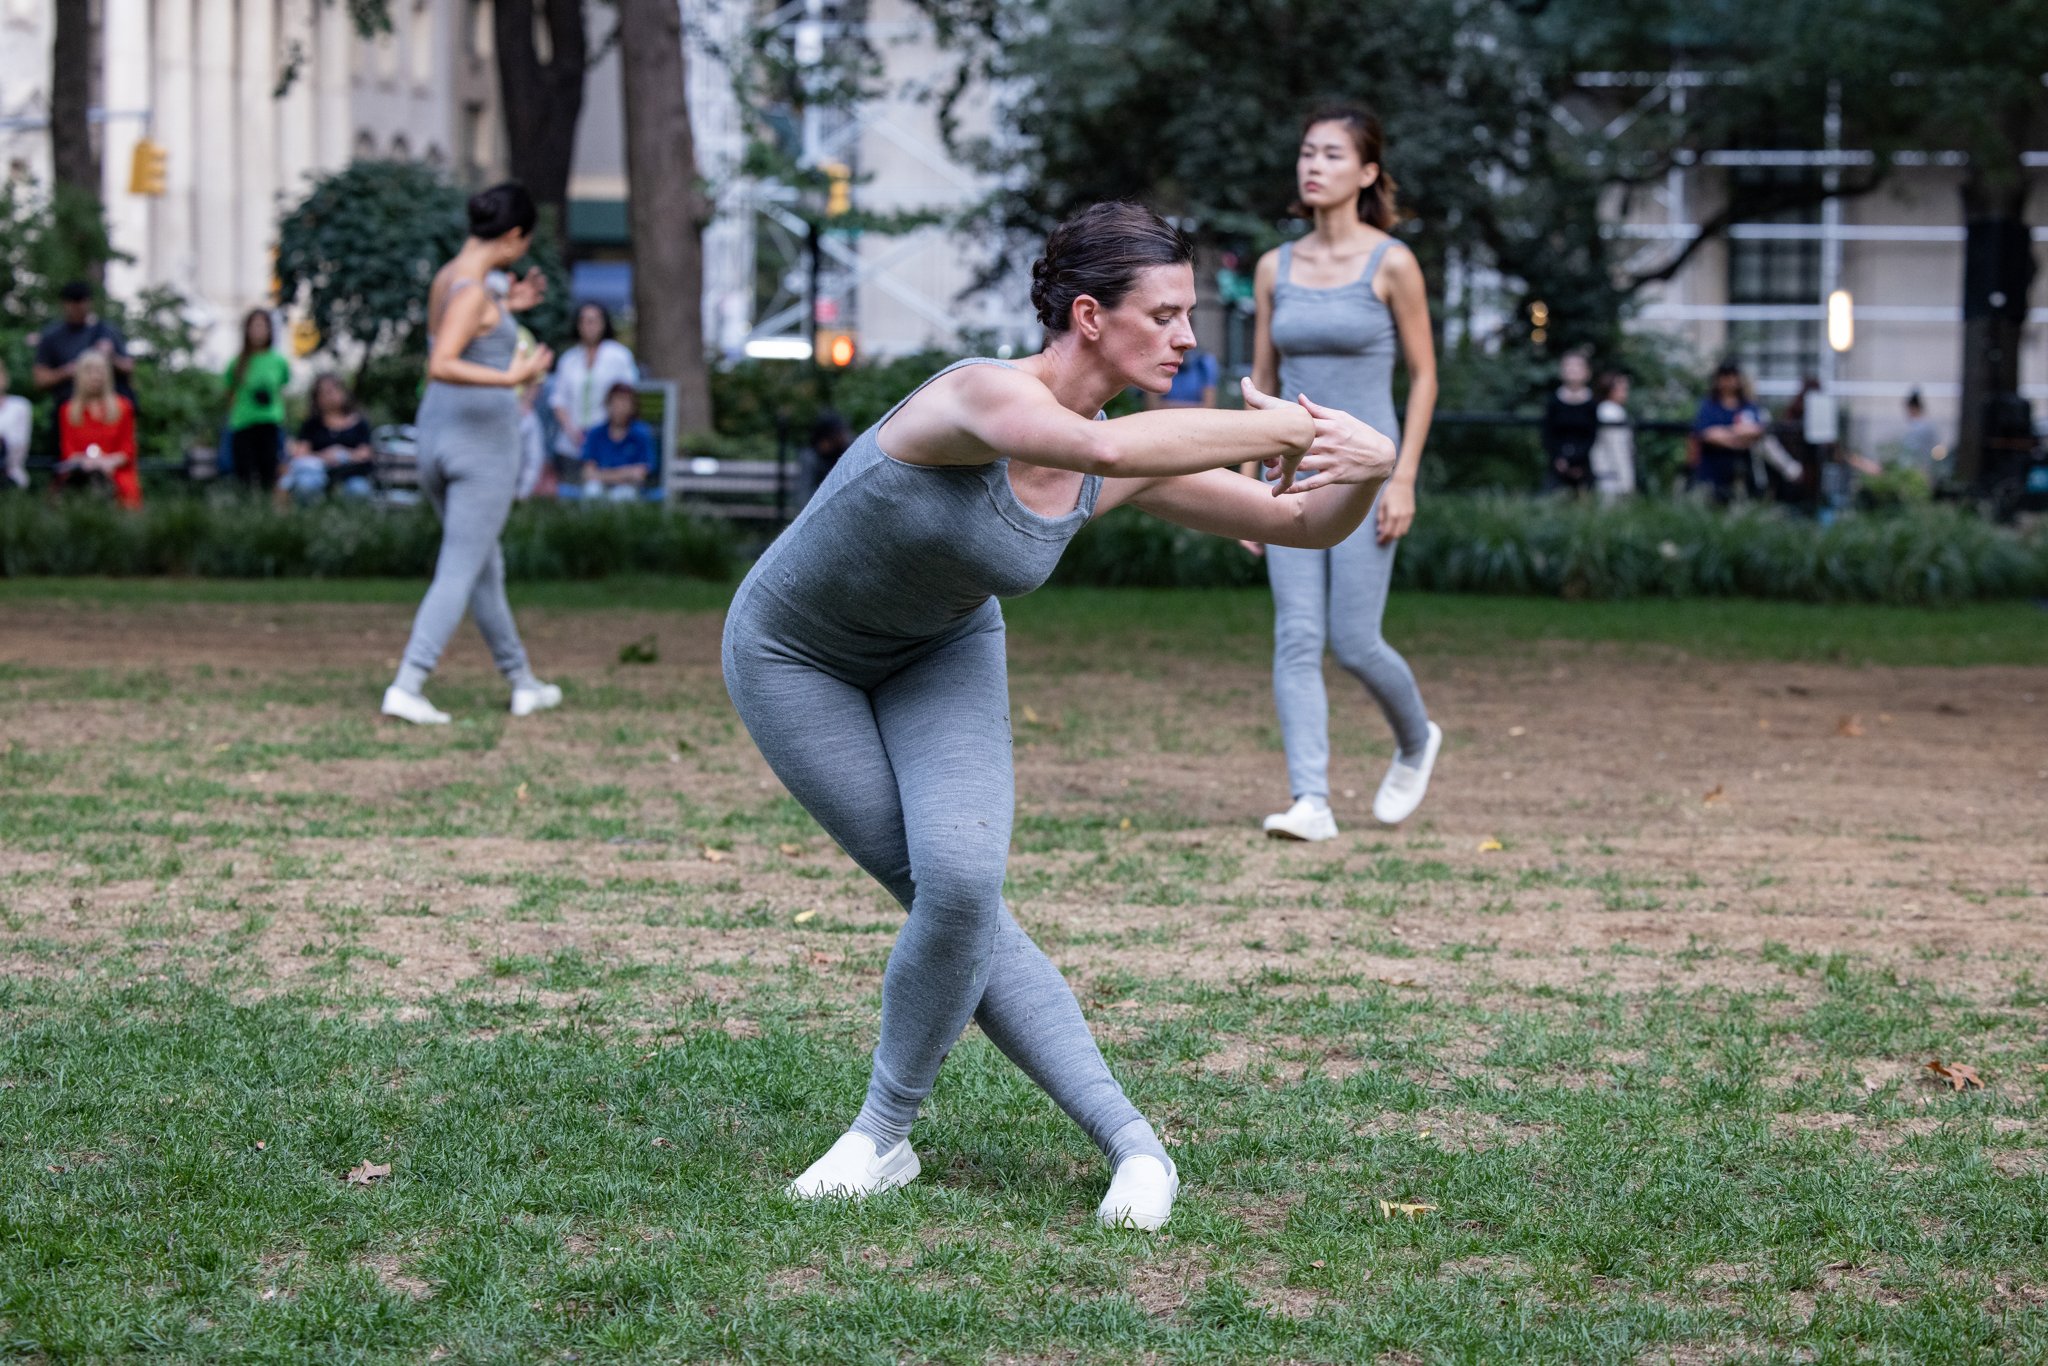  Chaery Moon, Caitlin Scranton &amp; Rhee in Beau Bree Rhee, Shadow of the Sea, 2022. Performance view, Madison Square Park, September 21, 2022. Presented by The Kitchen in partnership with Madison Square Park Conservancy. Artwork pictured: Cristina 